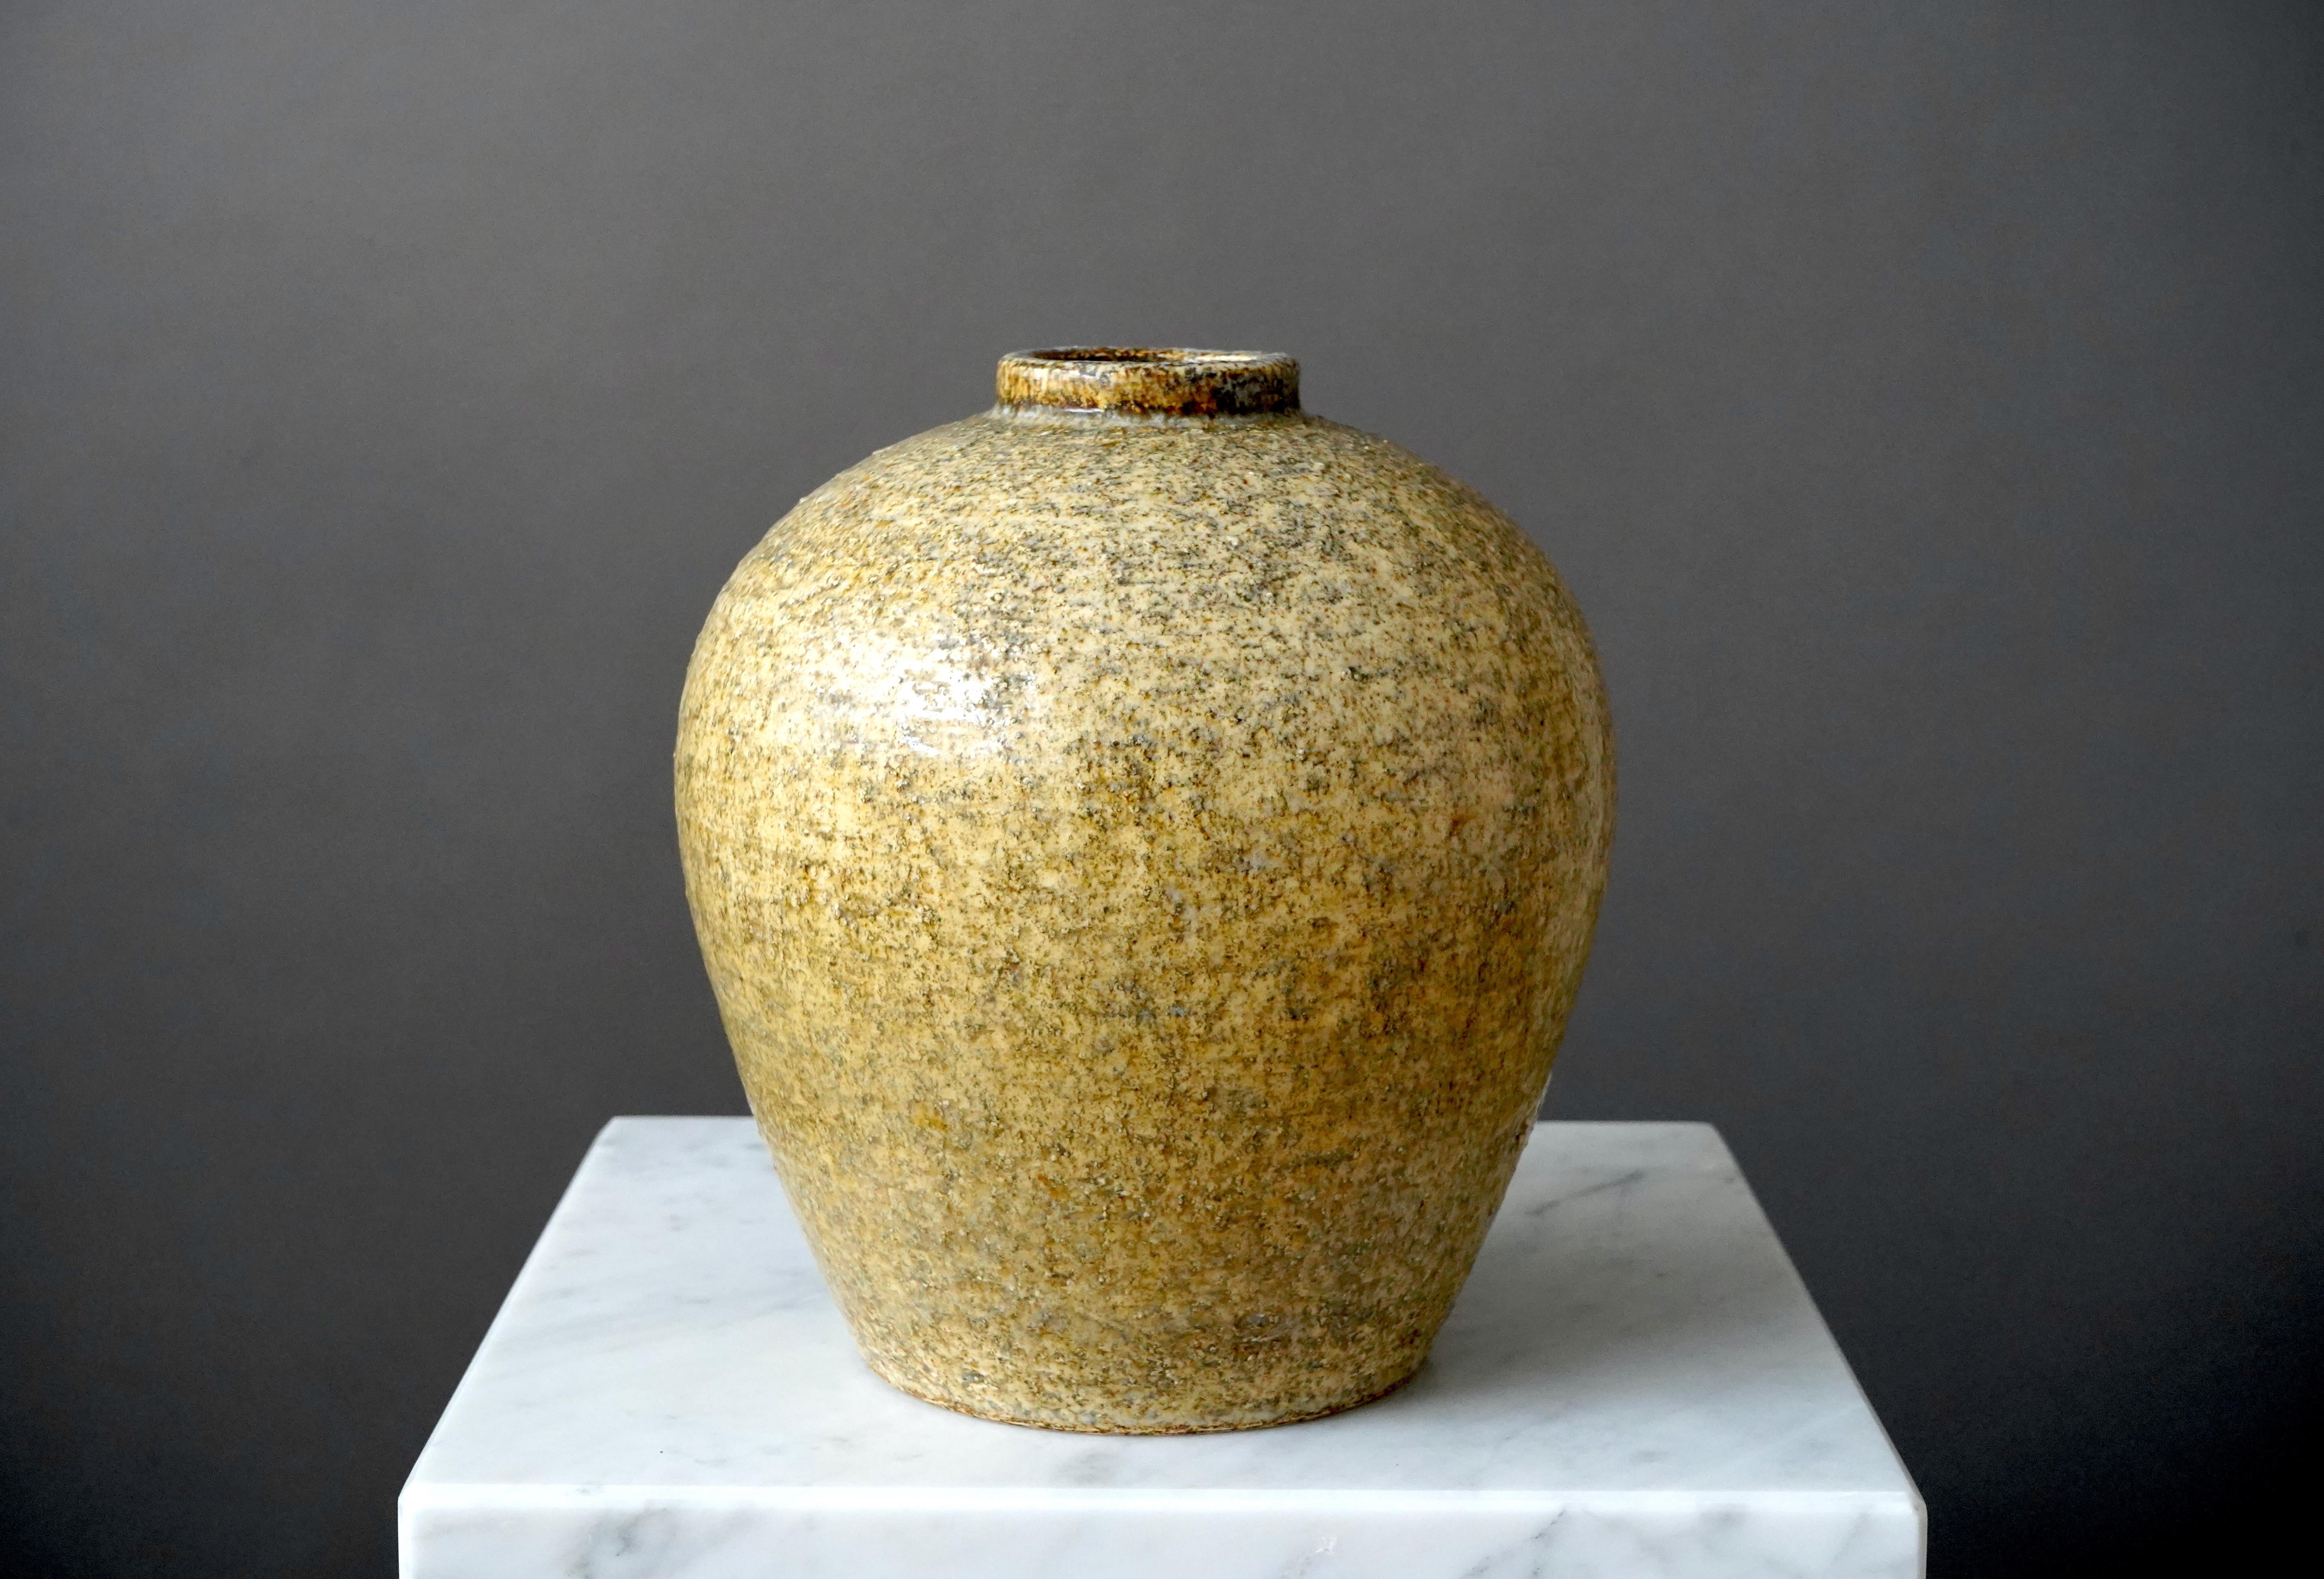 Beautiful and rare stoneware vase designed by Gertrud Lönegren.
This studio piece was created at Rorstrand in Sweden between 1936-1941.

Excellent condition. Stamped 'Rörstrand / Lönegren'.

Gertrud Lönegren was a Swedish ceramist born in 1905